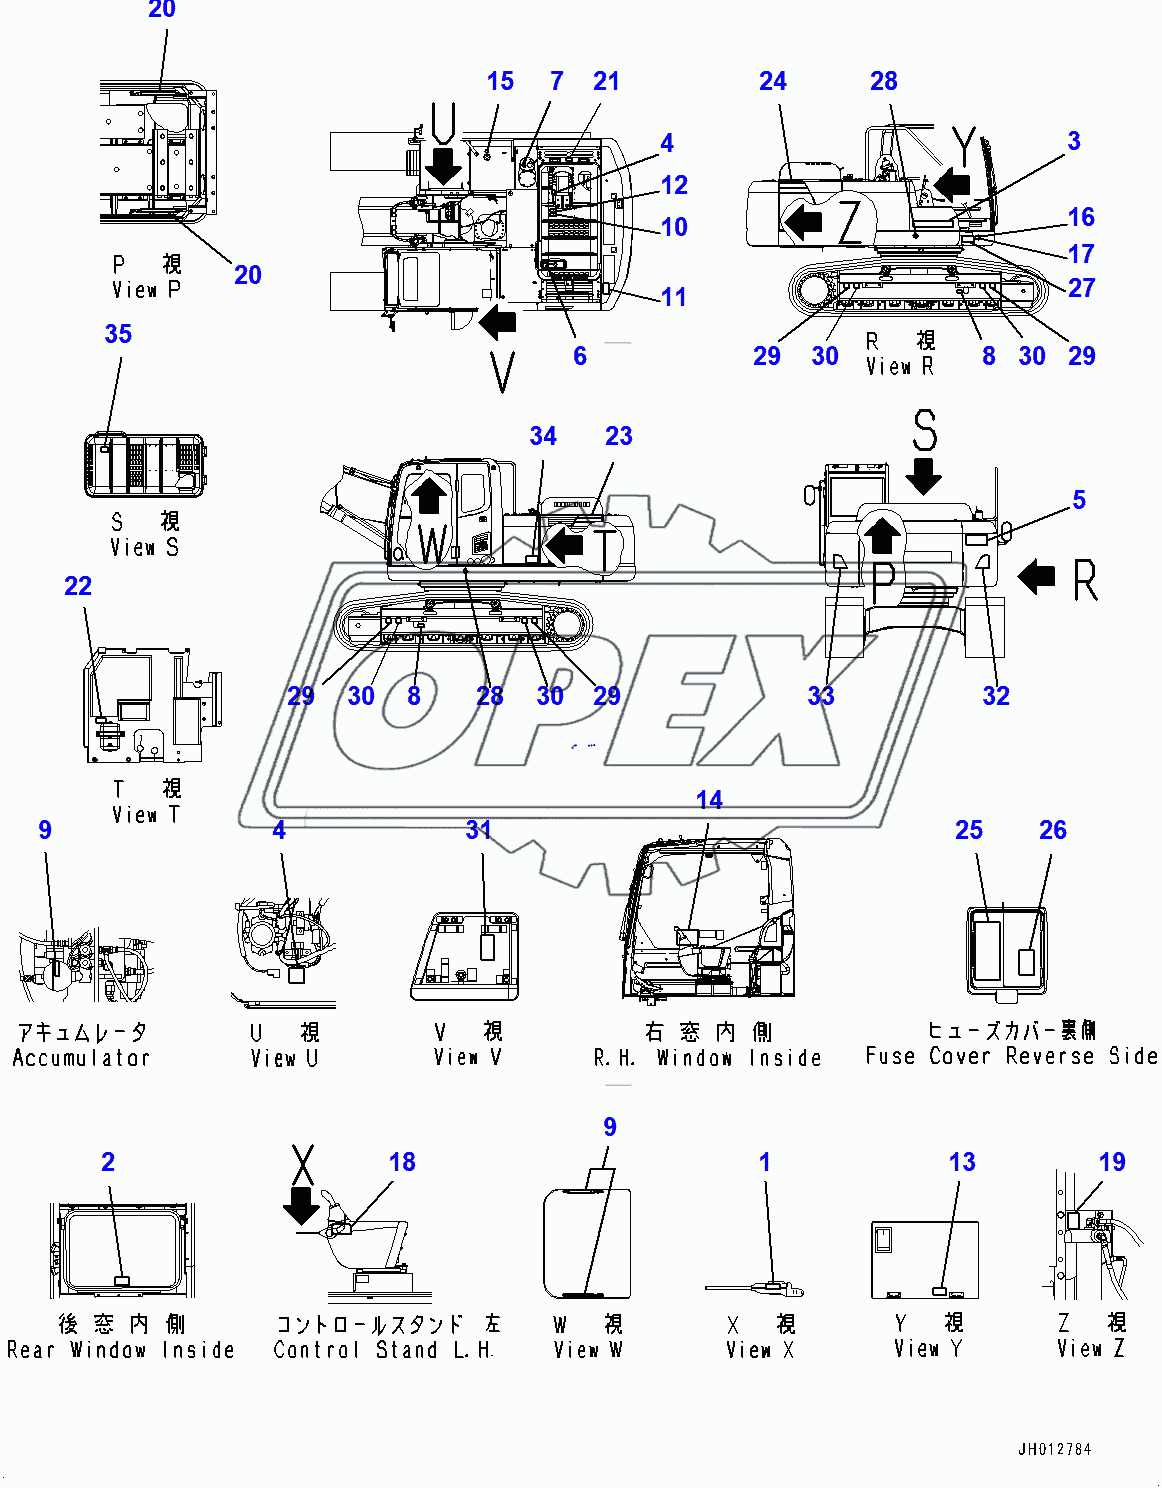  Marks and Name Plates (400001-) 1